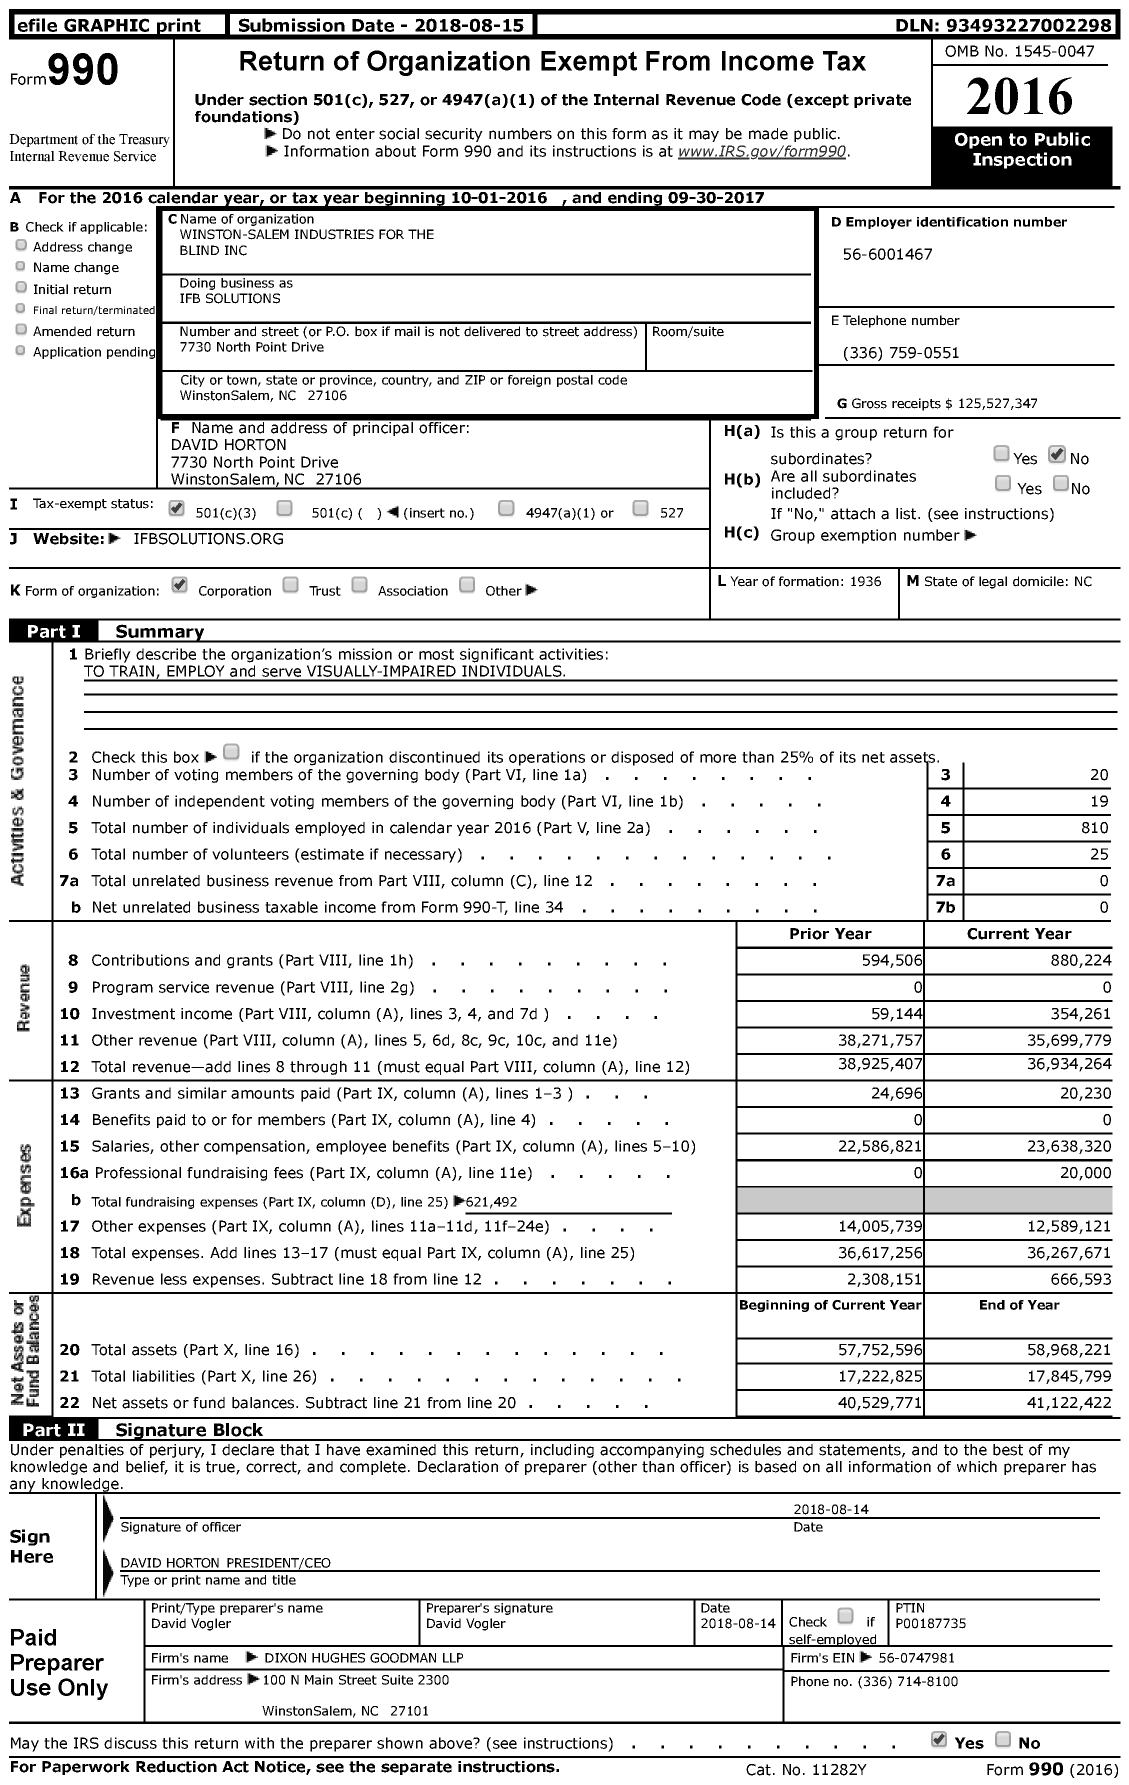 Image of first page of 2016 Form 990 for Ifb Solutions (IFB)